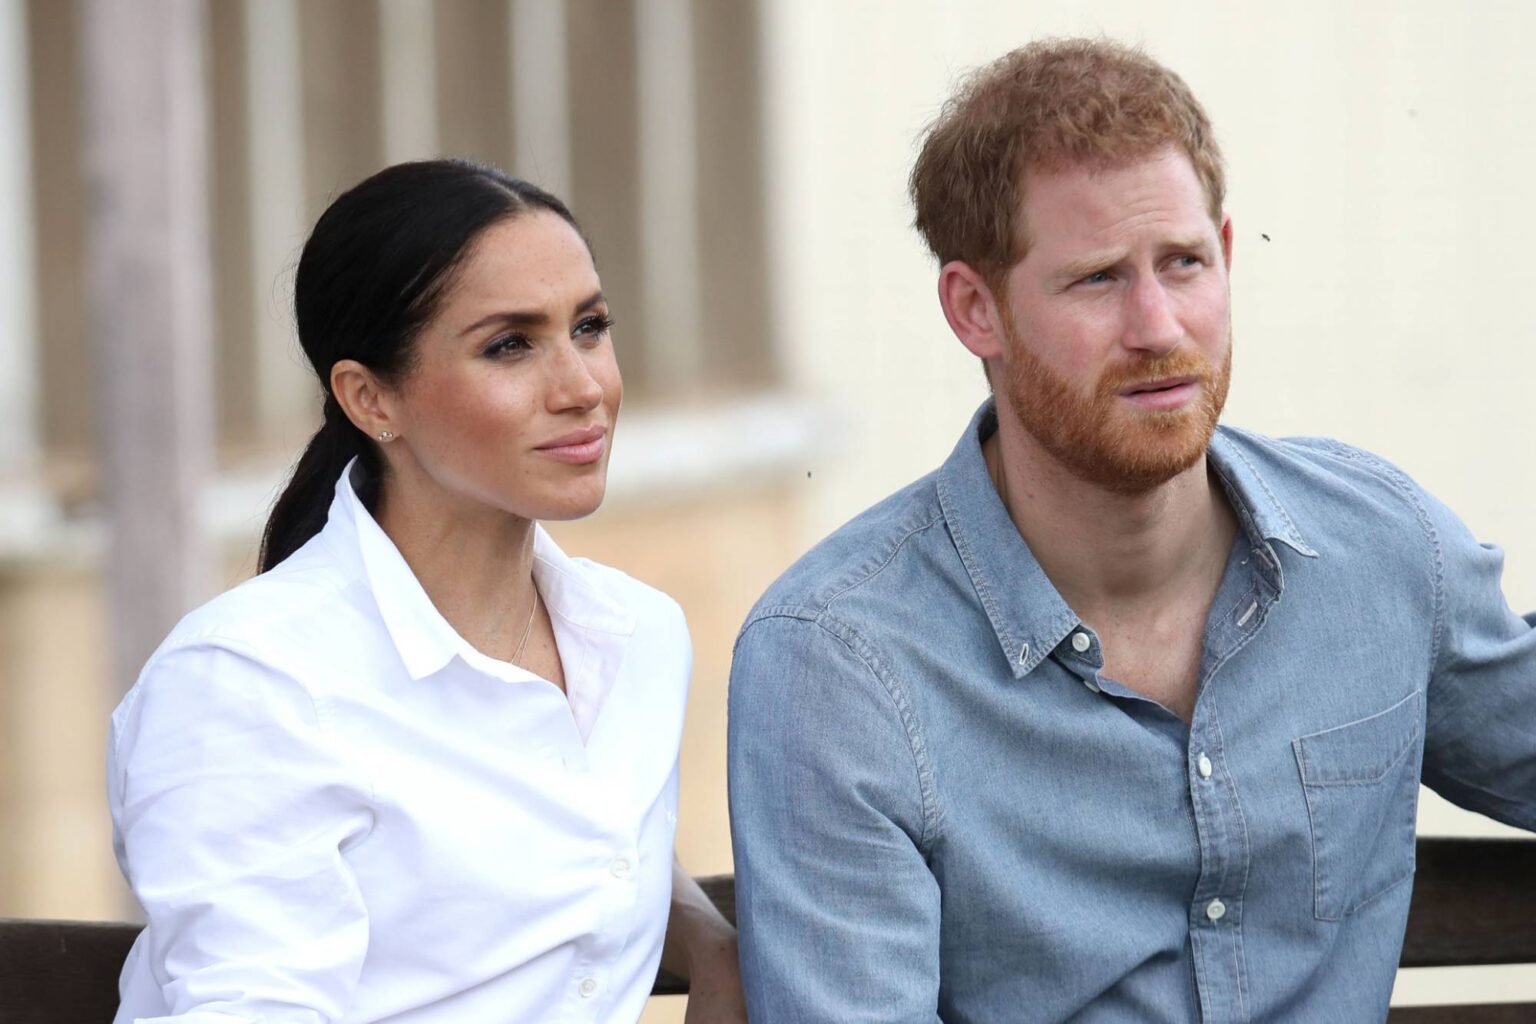 Prince Harry and Meghan Markle are not longer of royal status. So, what exactly is their net worth looking like these days?